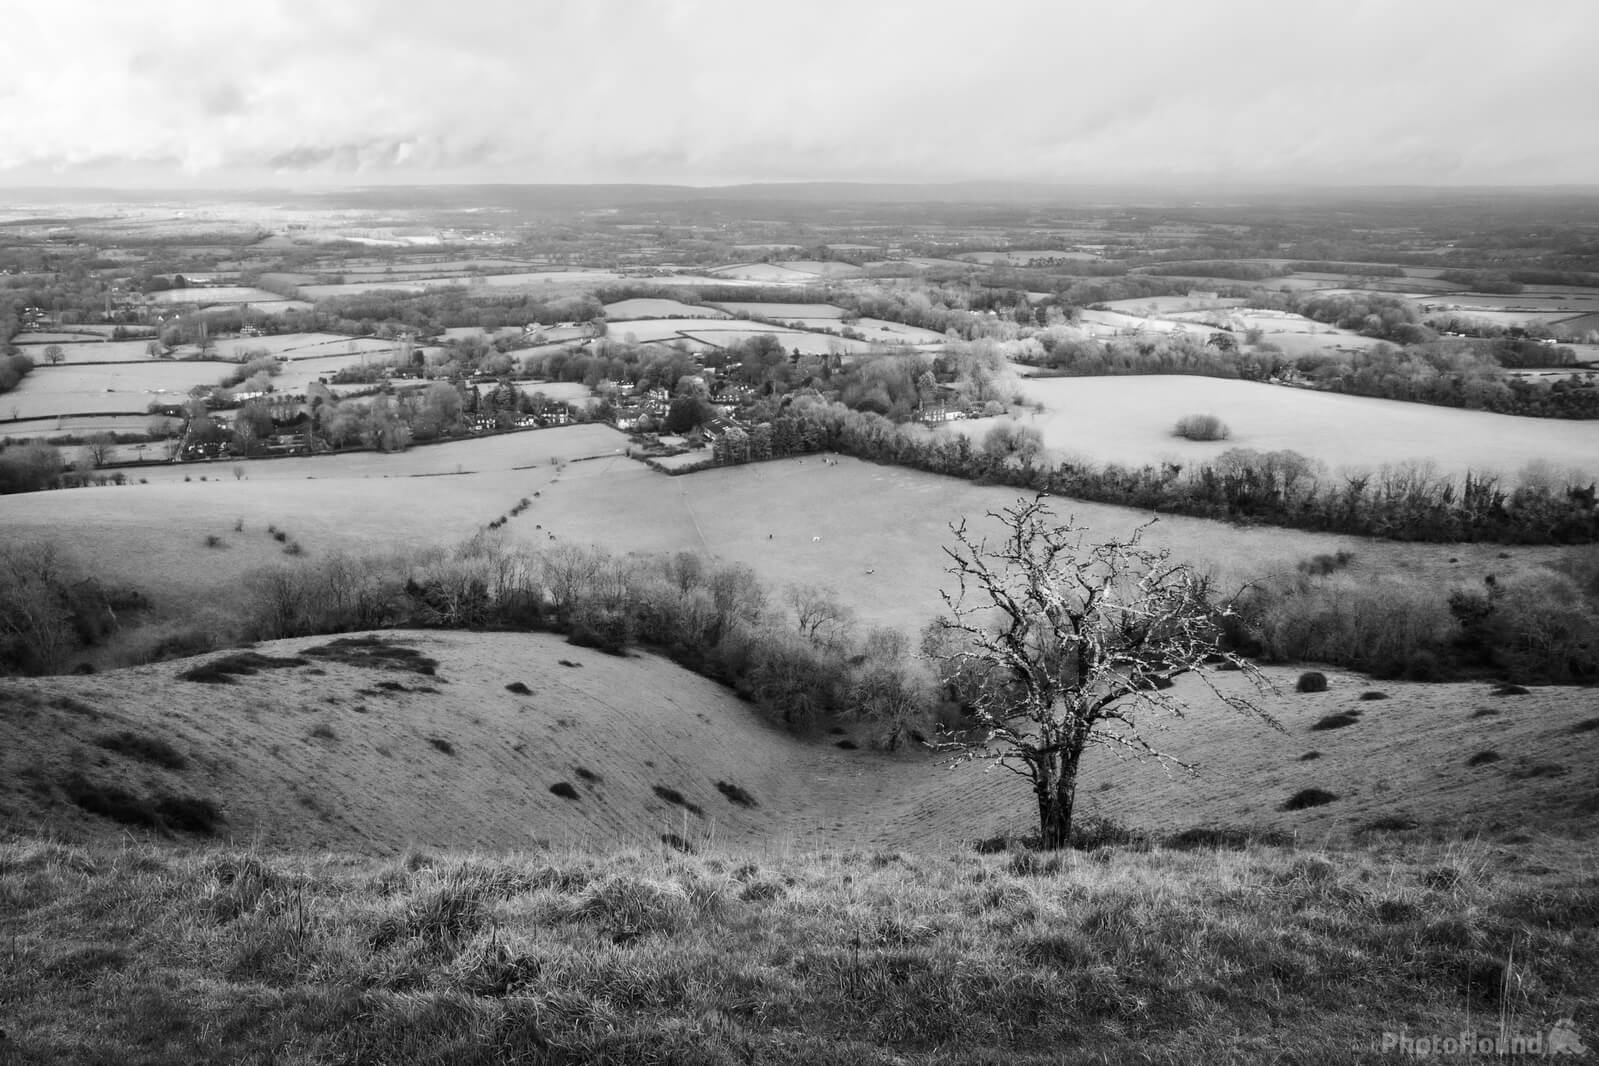 Image of Ditchling Beacon (South Downs NP) by Richard Joiner